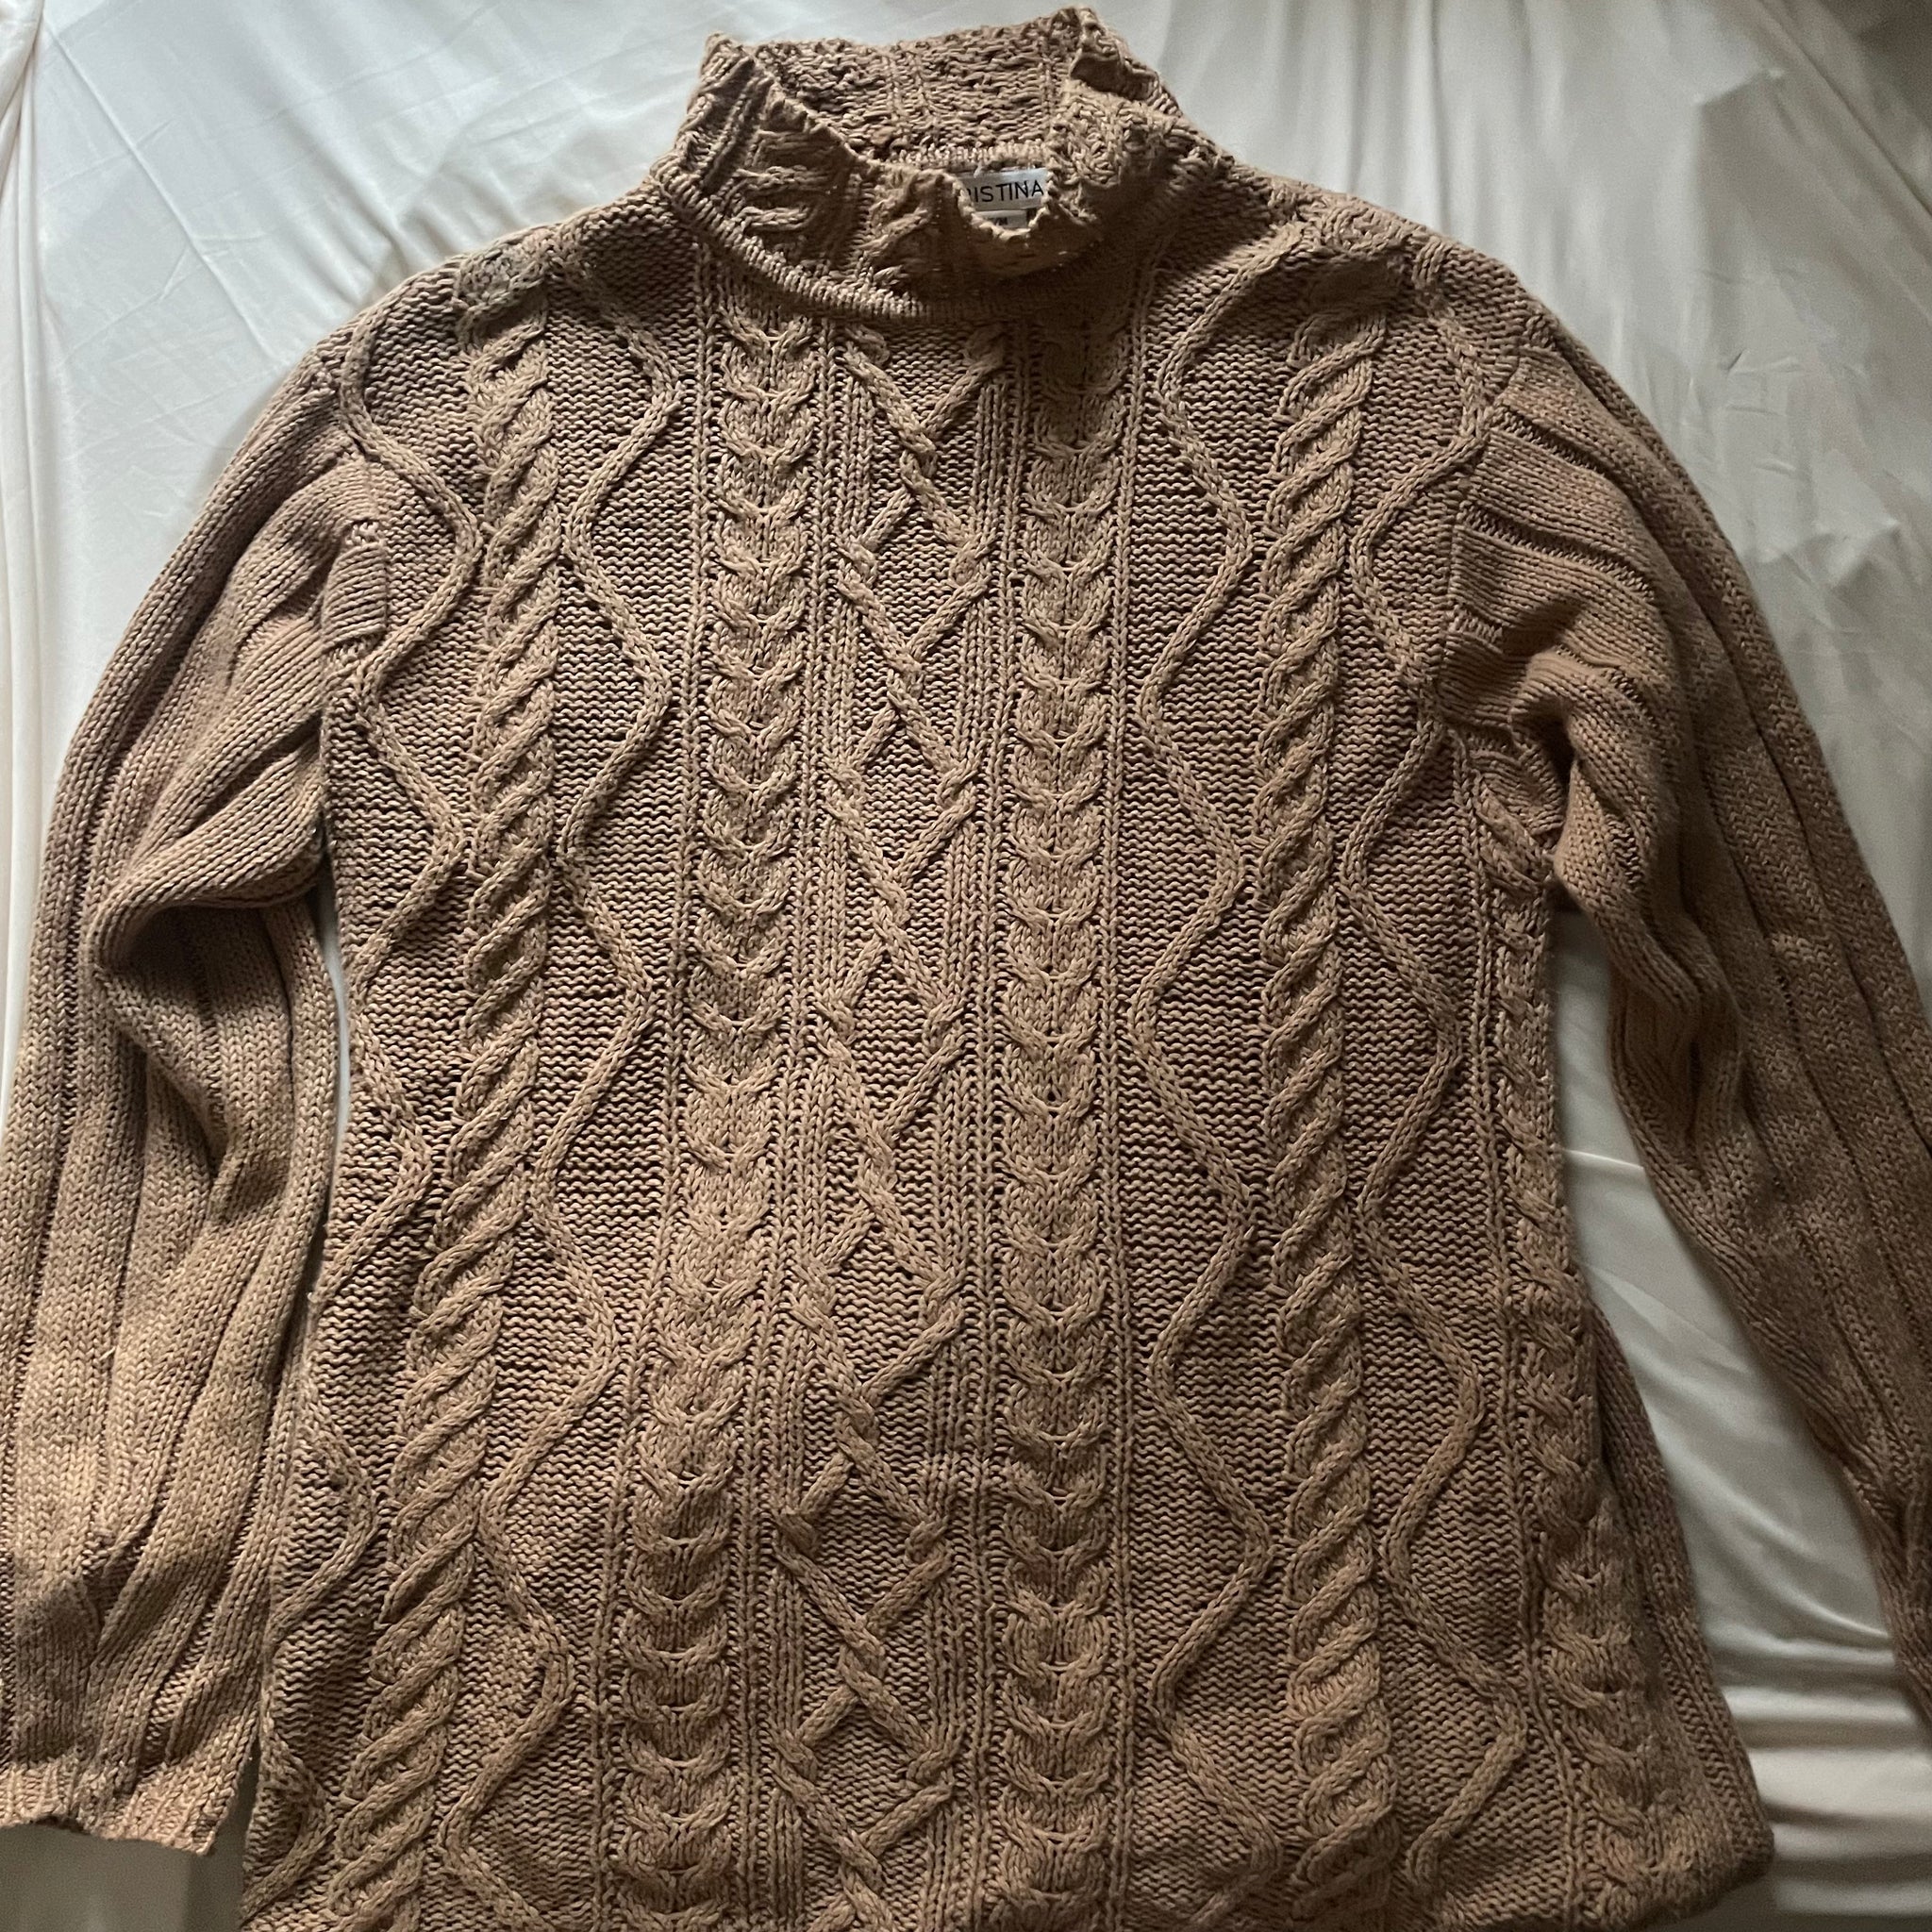 Camel Brown Cable Knit Mock Neck Sweater (M-XL)